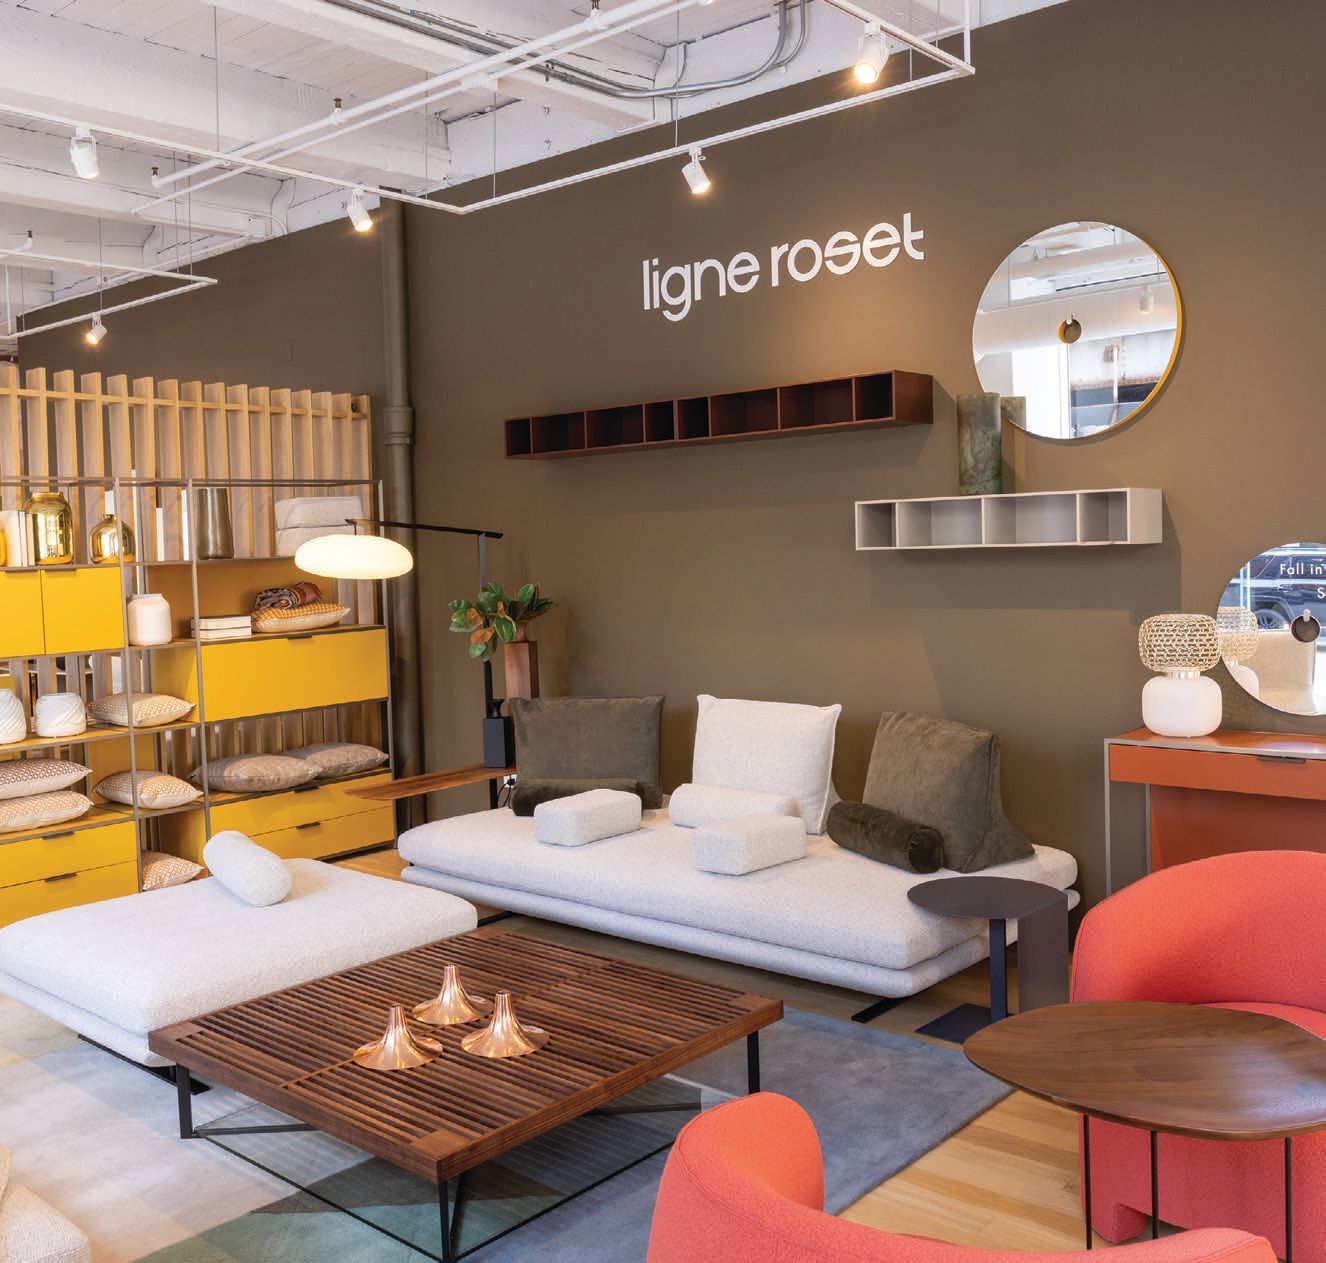 Ligne Roset’s showroom in River North PHOTO: BY LACOUR IMAGES